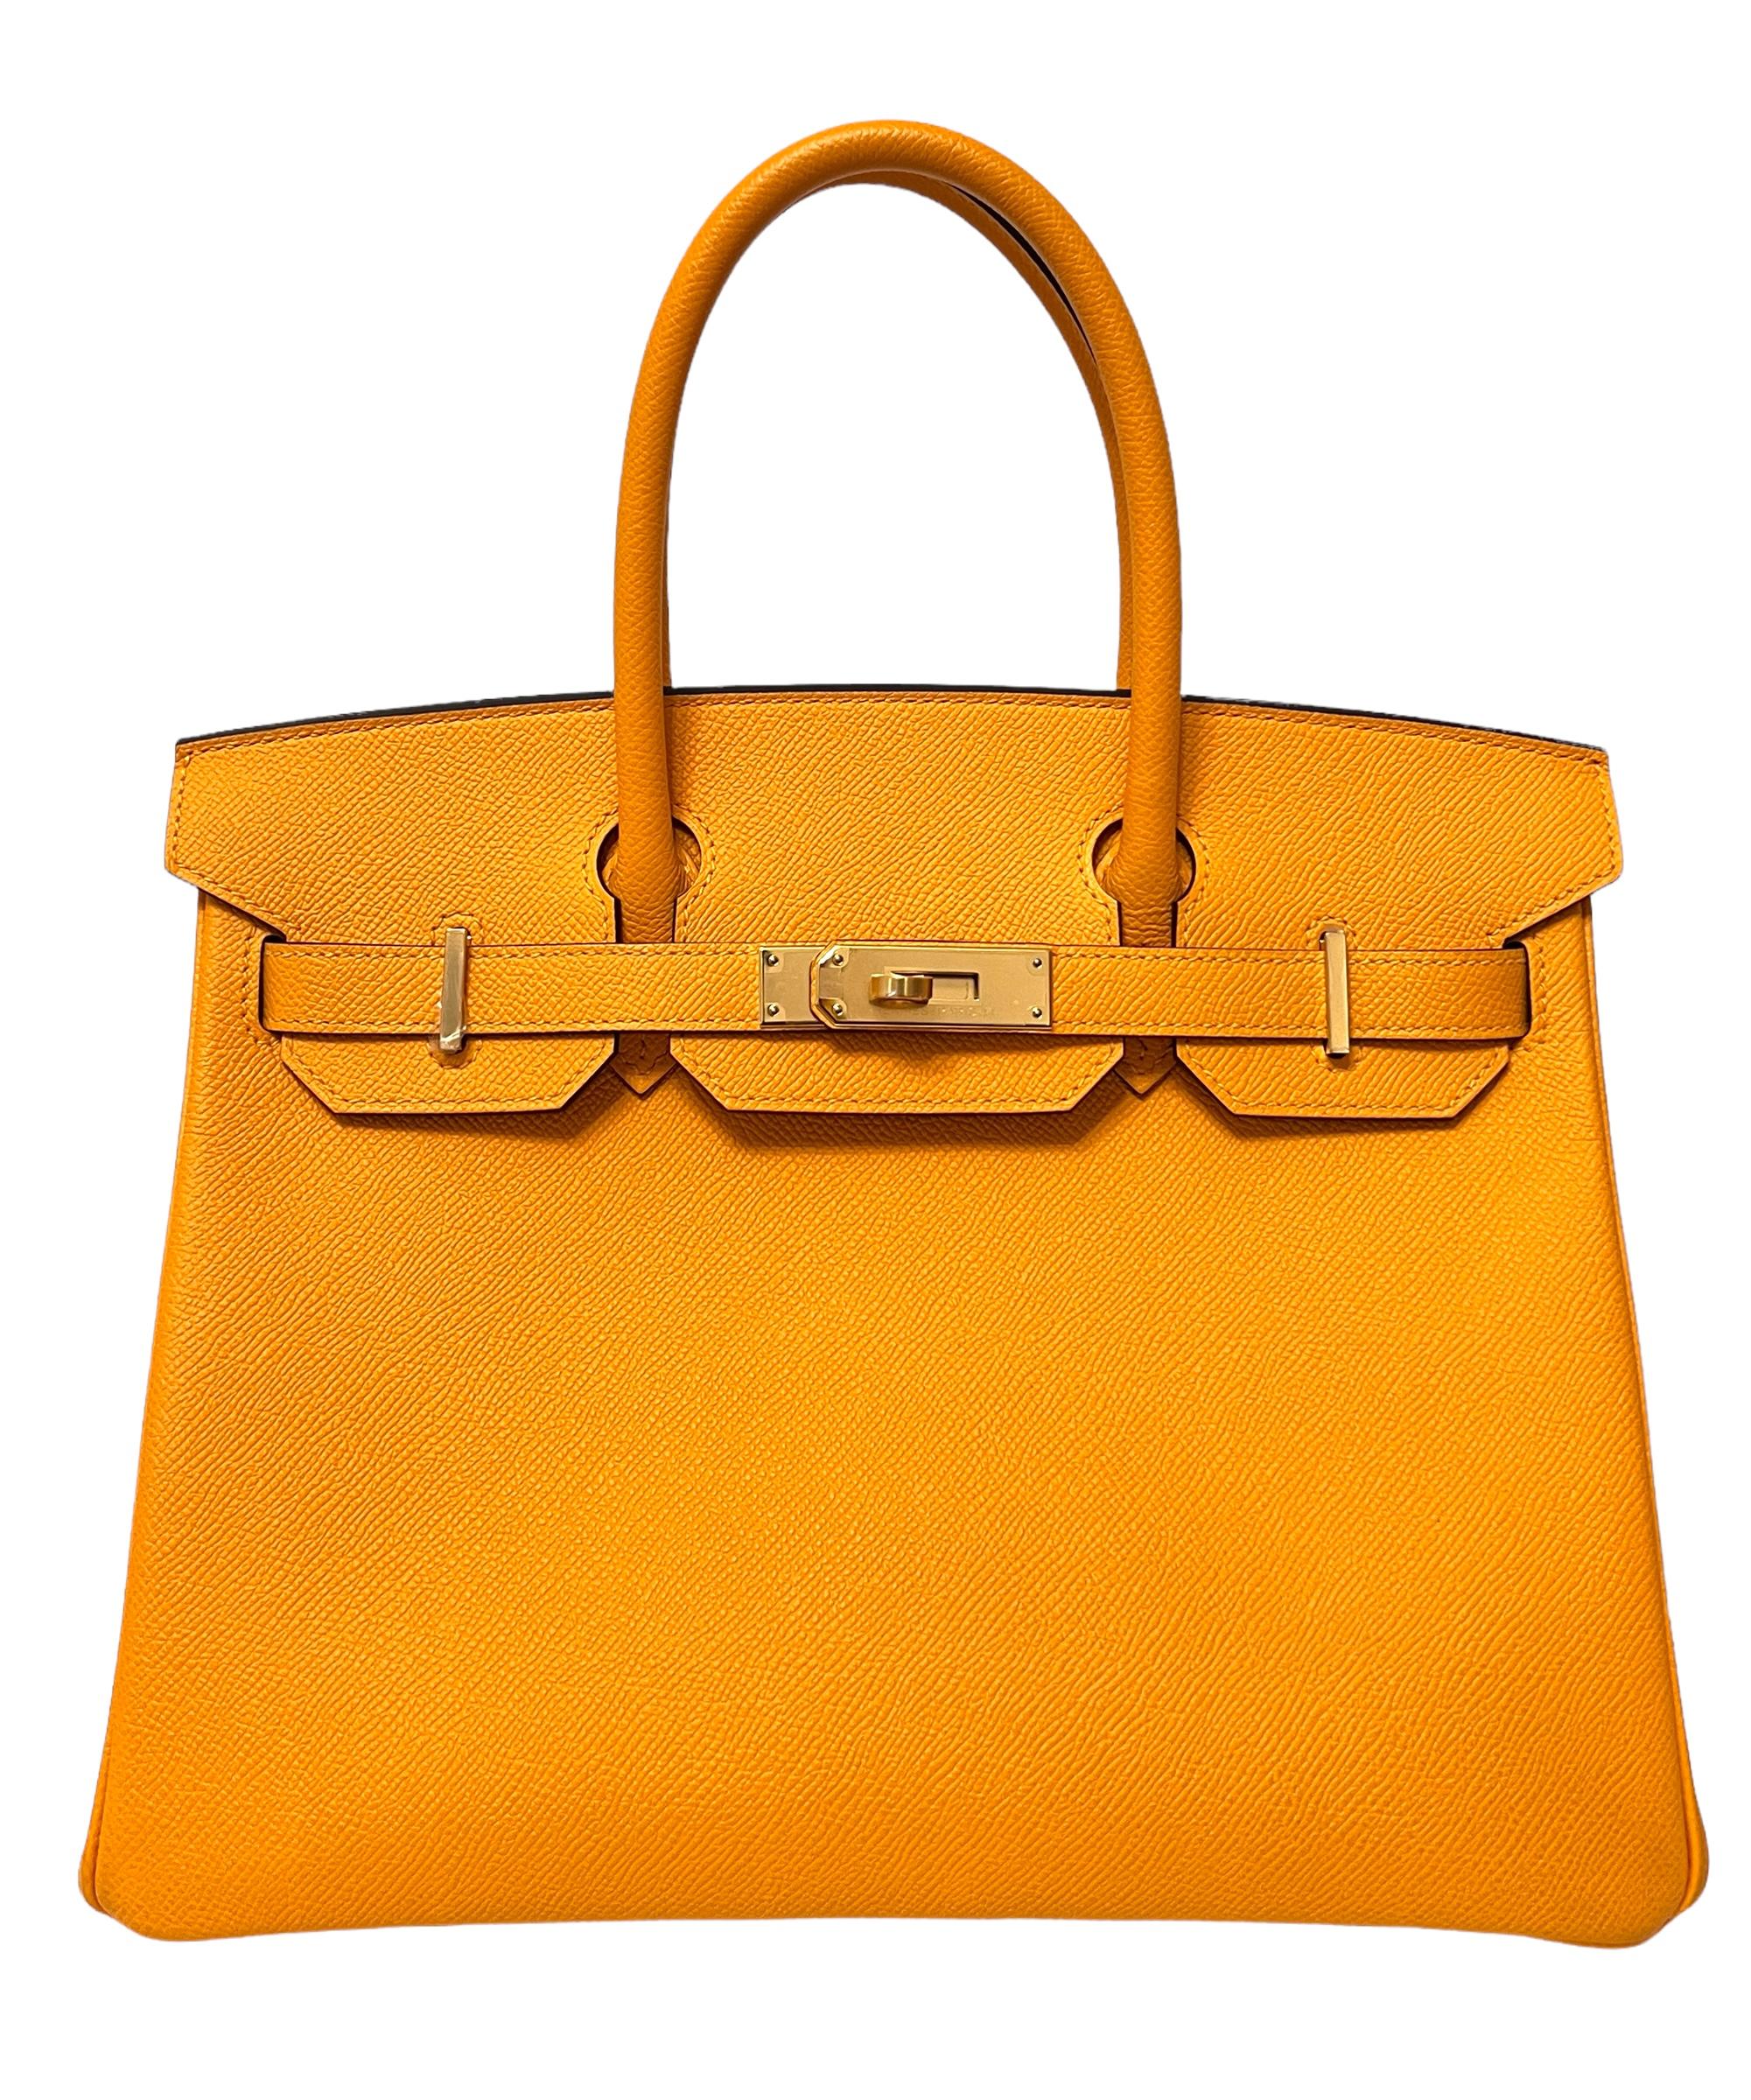 Stunning As New 2021, 1 of 1 HSS Special Order Hermes Birkin 30 Jaune D’or Epsom Leather complimented by Gold Hardware. Like new with Plastic on Hardware and feet. Z Stamp 2021.

Shop with confidence from Lux Addicts. Authenticity Guaranteed!